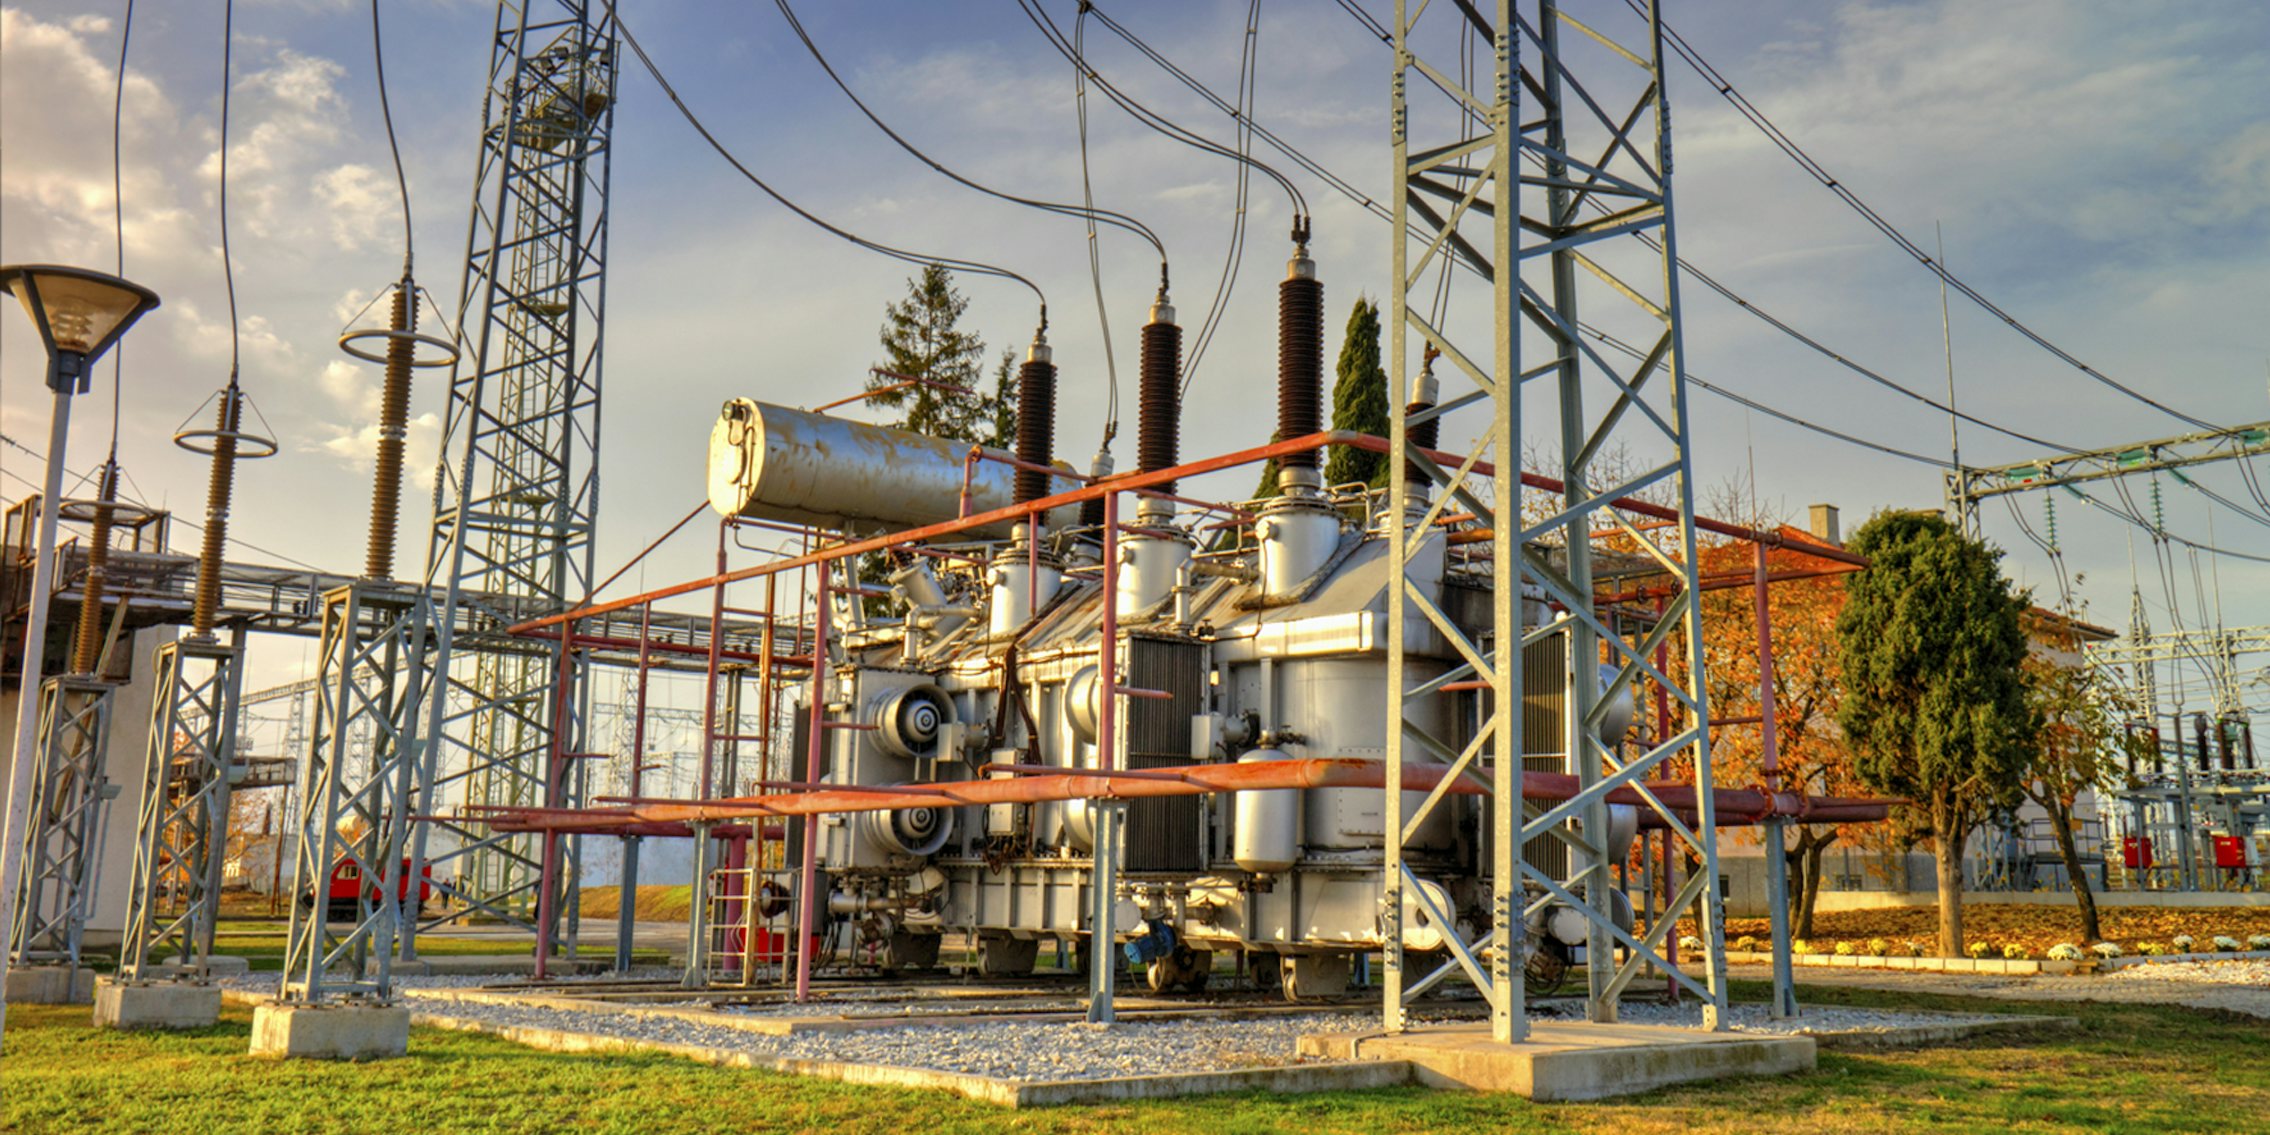 power transformer in high voltage switchyard in electrical substation